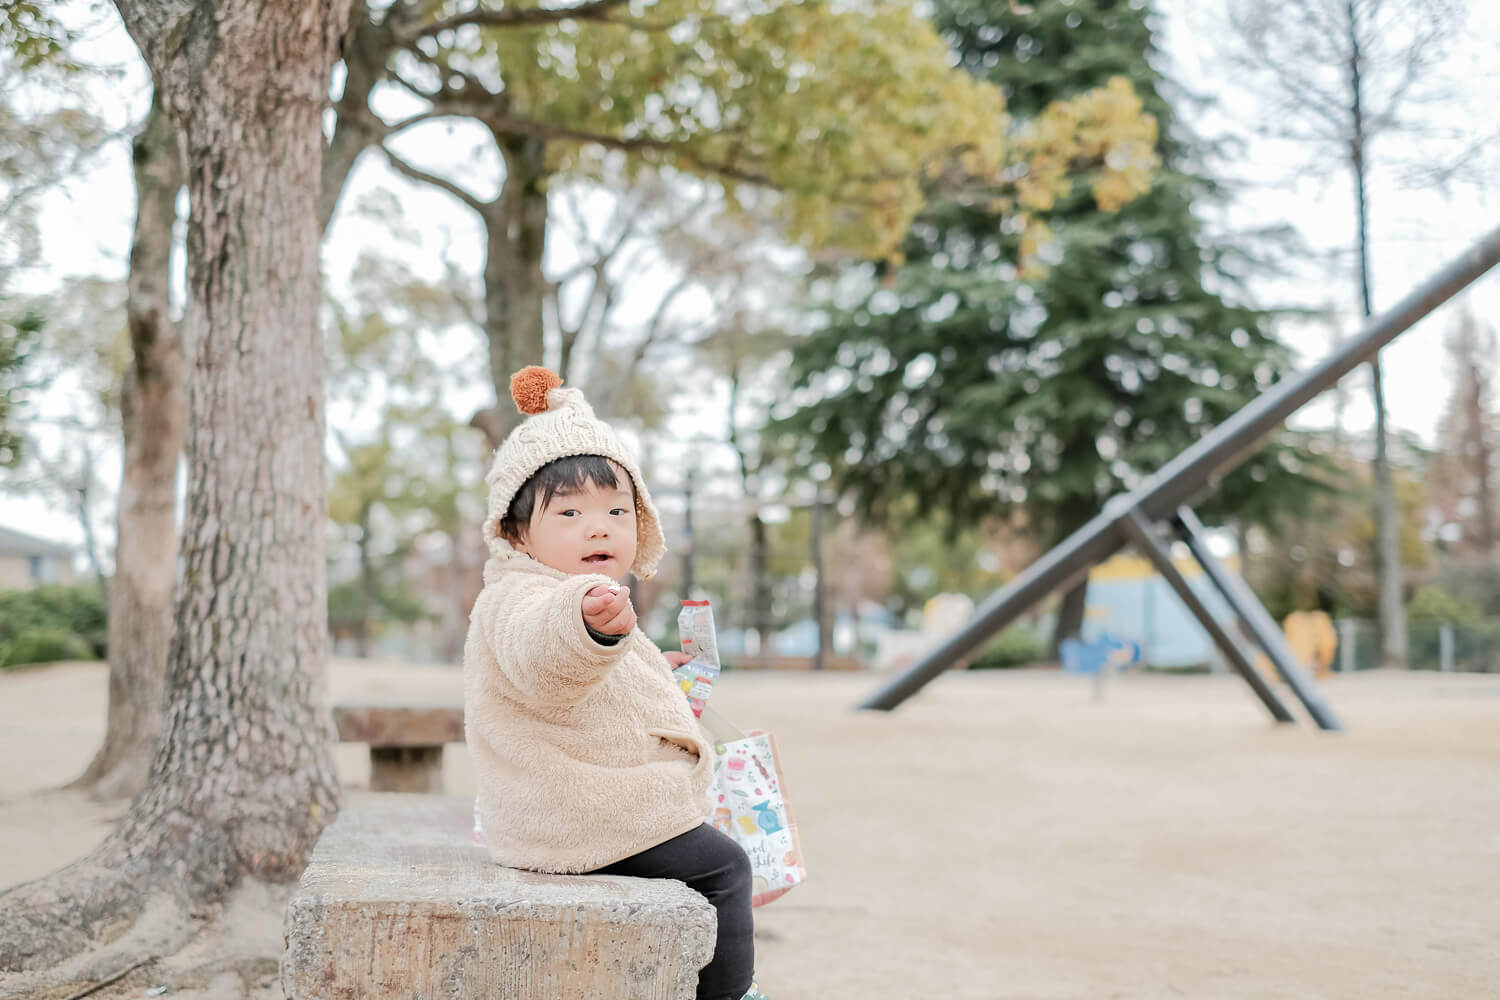 XF35mmF1.4Rレビュー